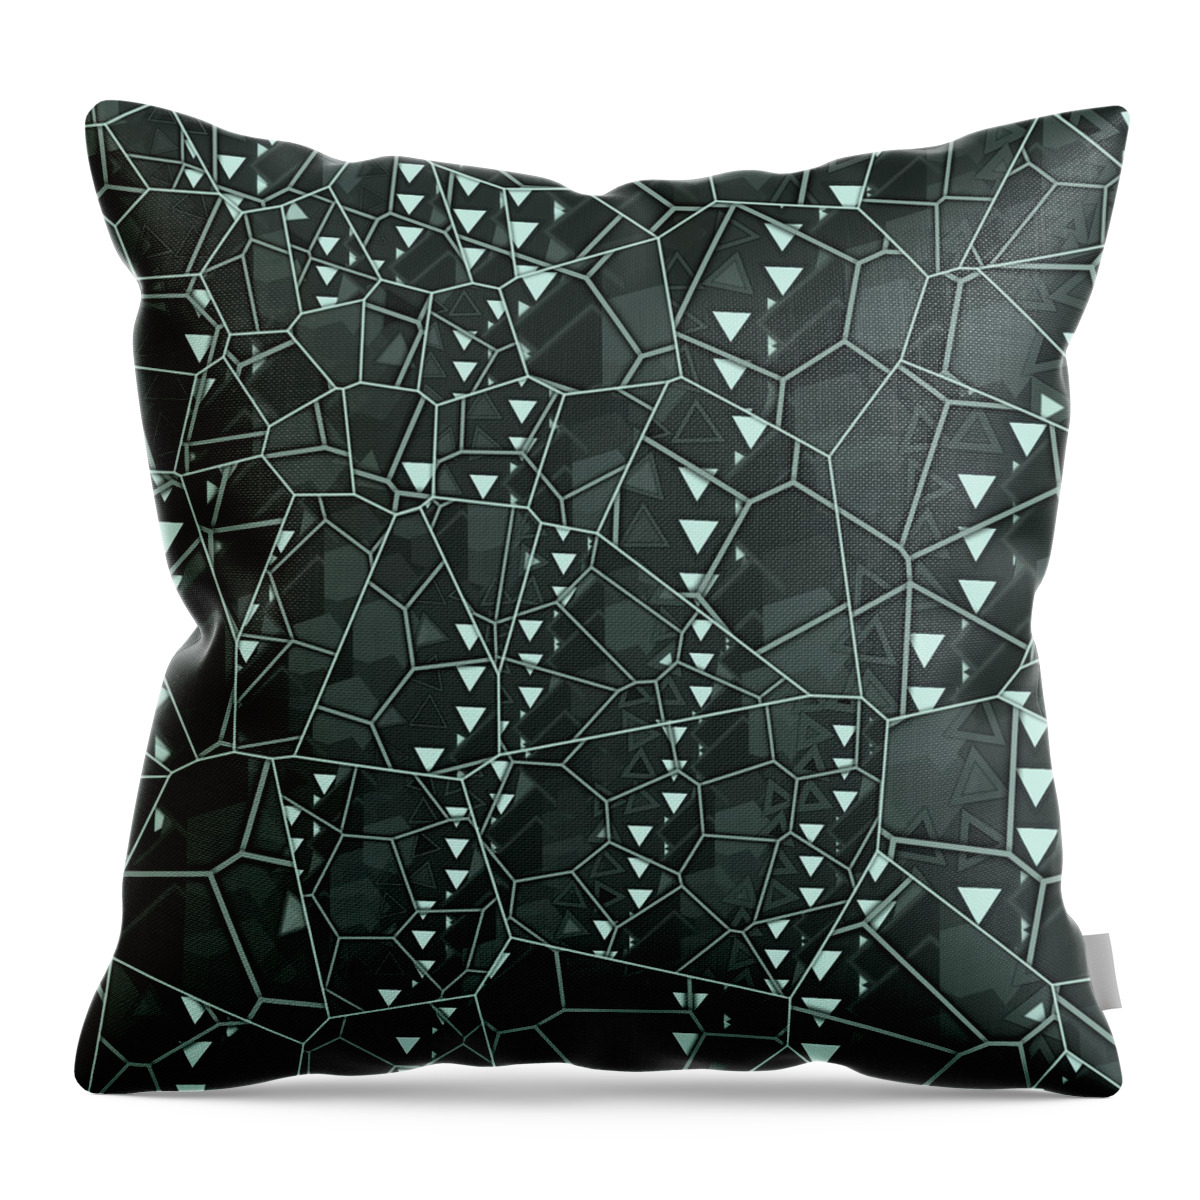 Abstract Throw Pillow featuring the digital art Pattern 12 by Marko Sabotin